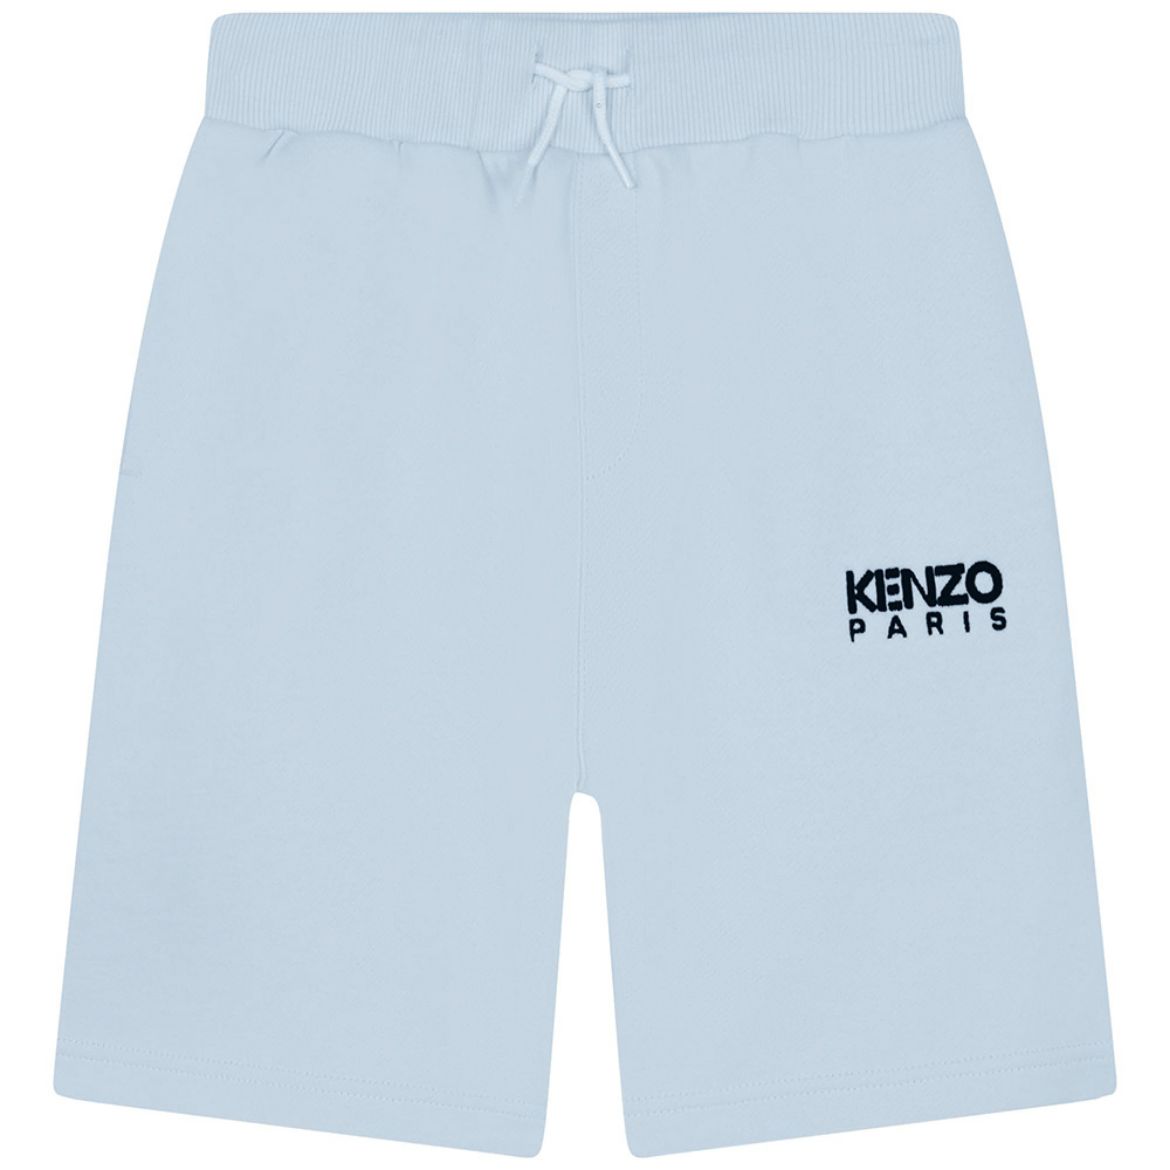 Picture of Kenzo Boys Pale Blue Shorts